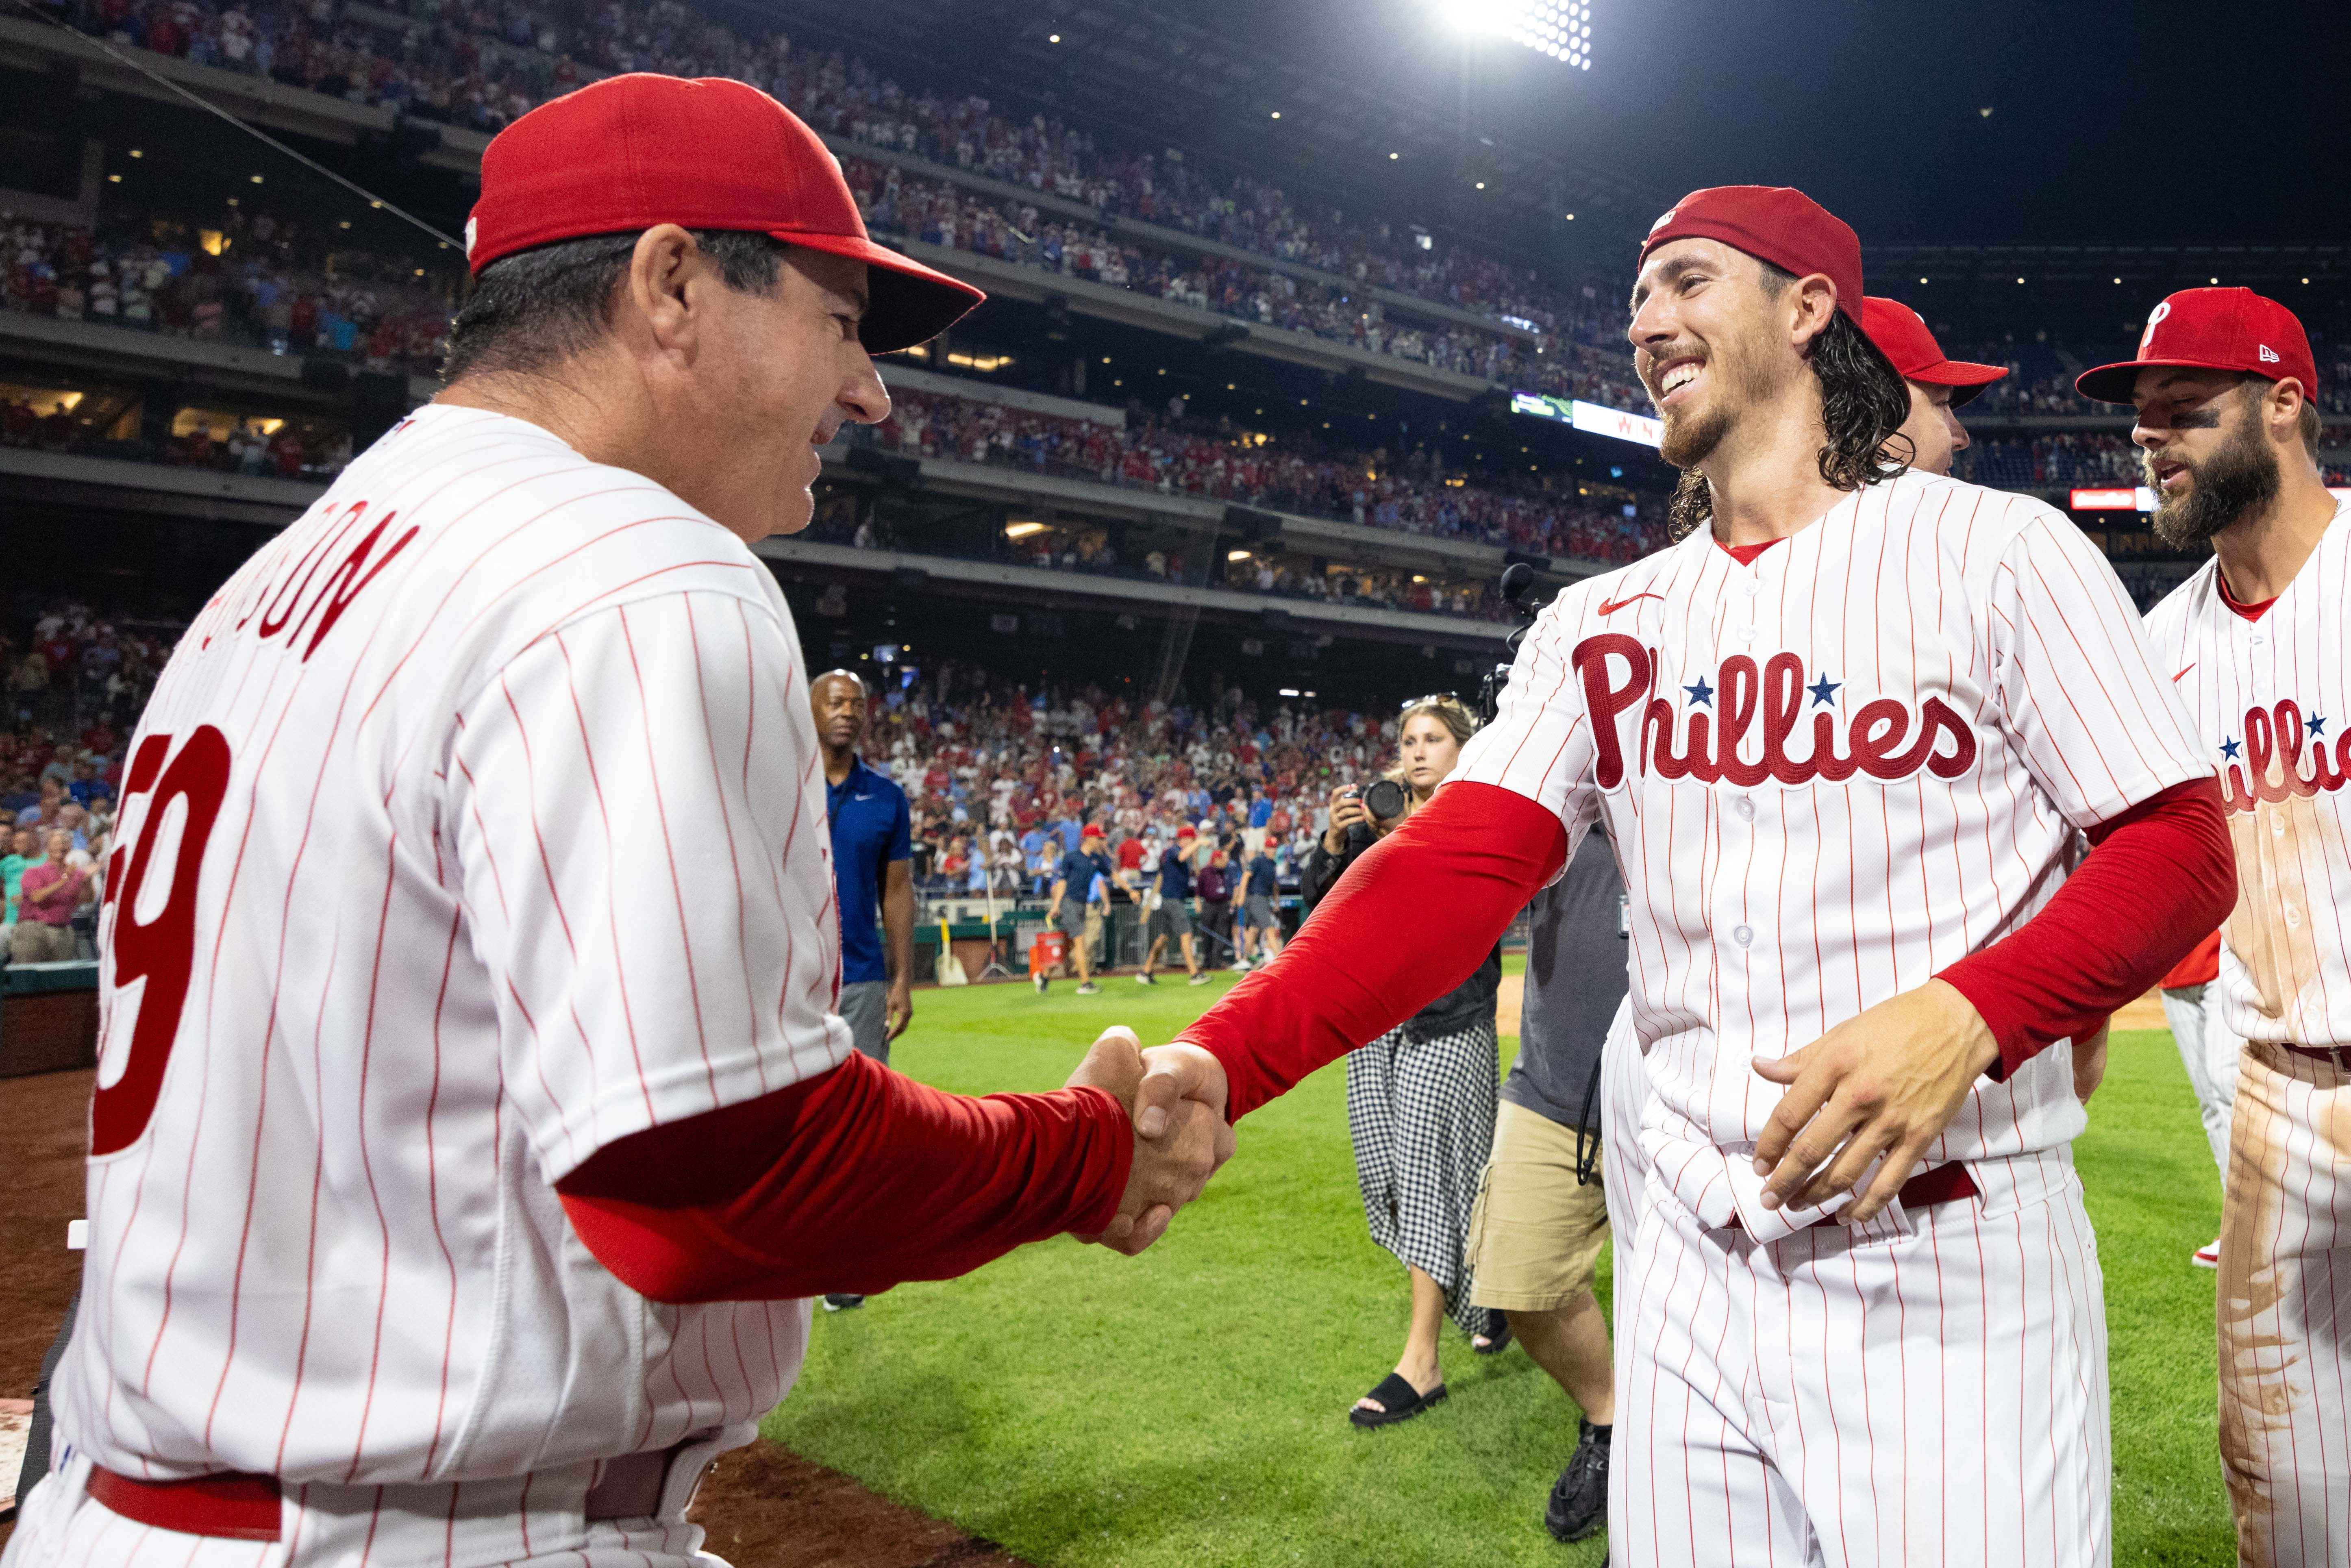 Phillies finish off 4-game sweep of Nationals on rookie's walk-off